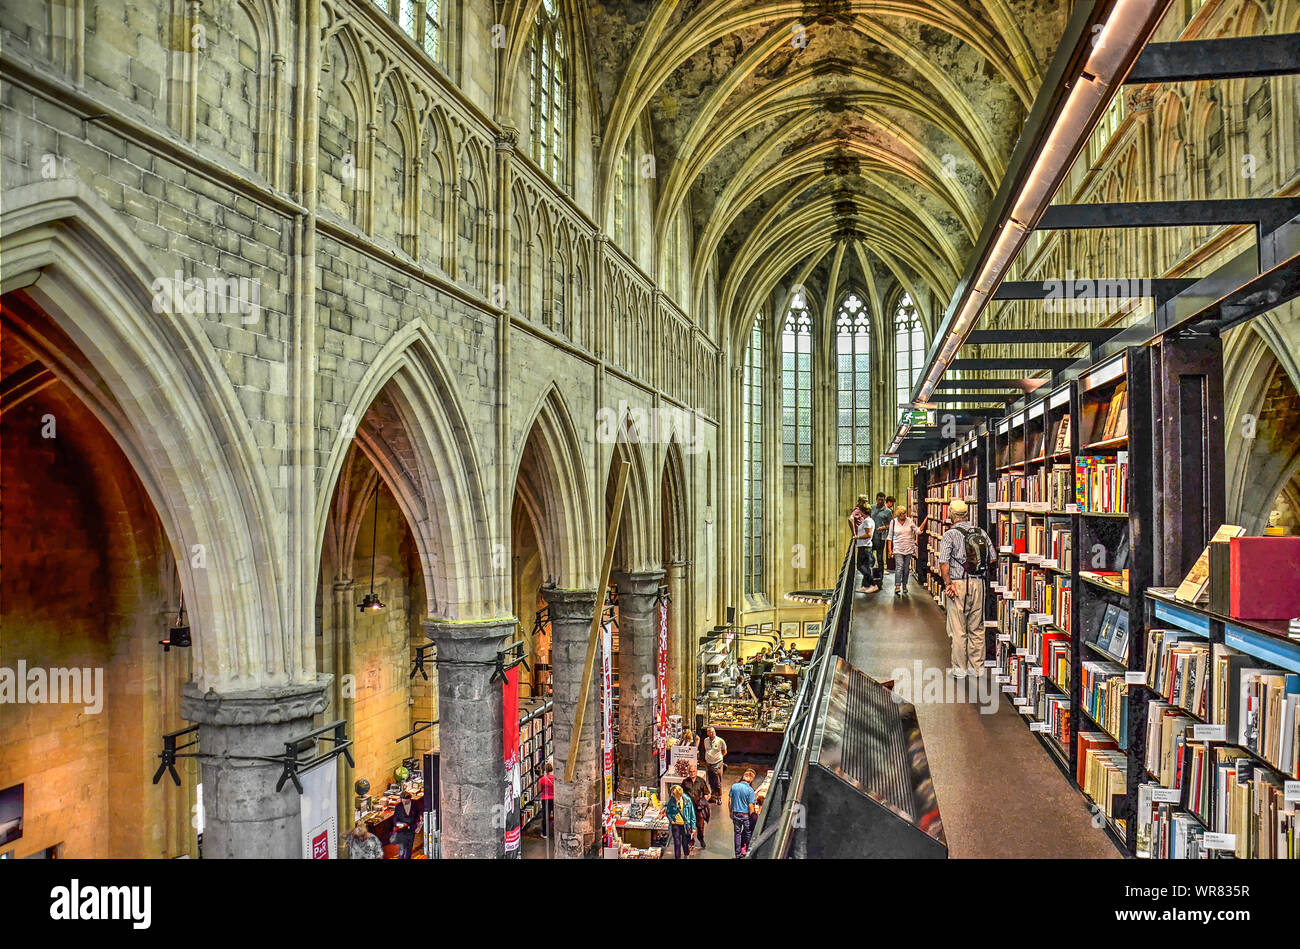 Maastricht, The Netherlands, September 8, 2019: view from one of the floors with books along the nave towards the chancel in de former Dominican churc Stock Photo